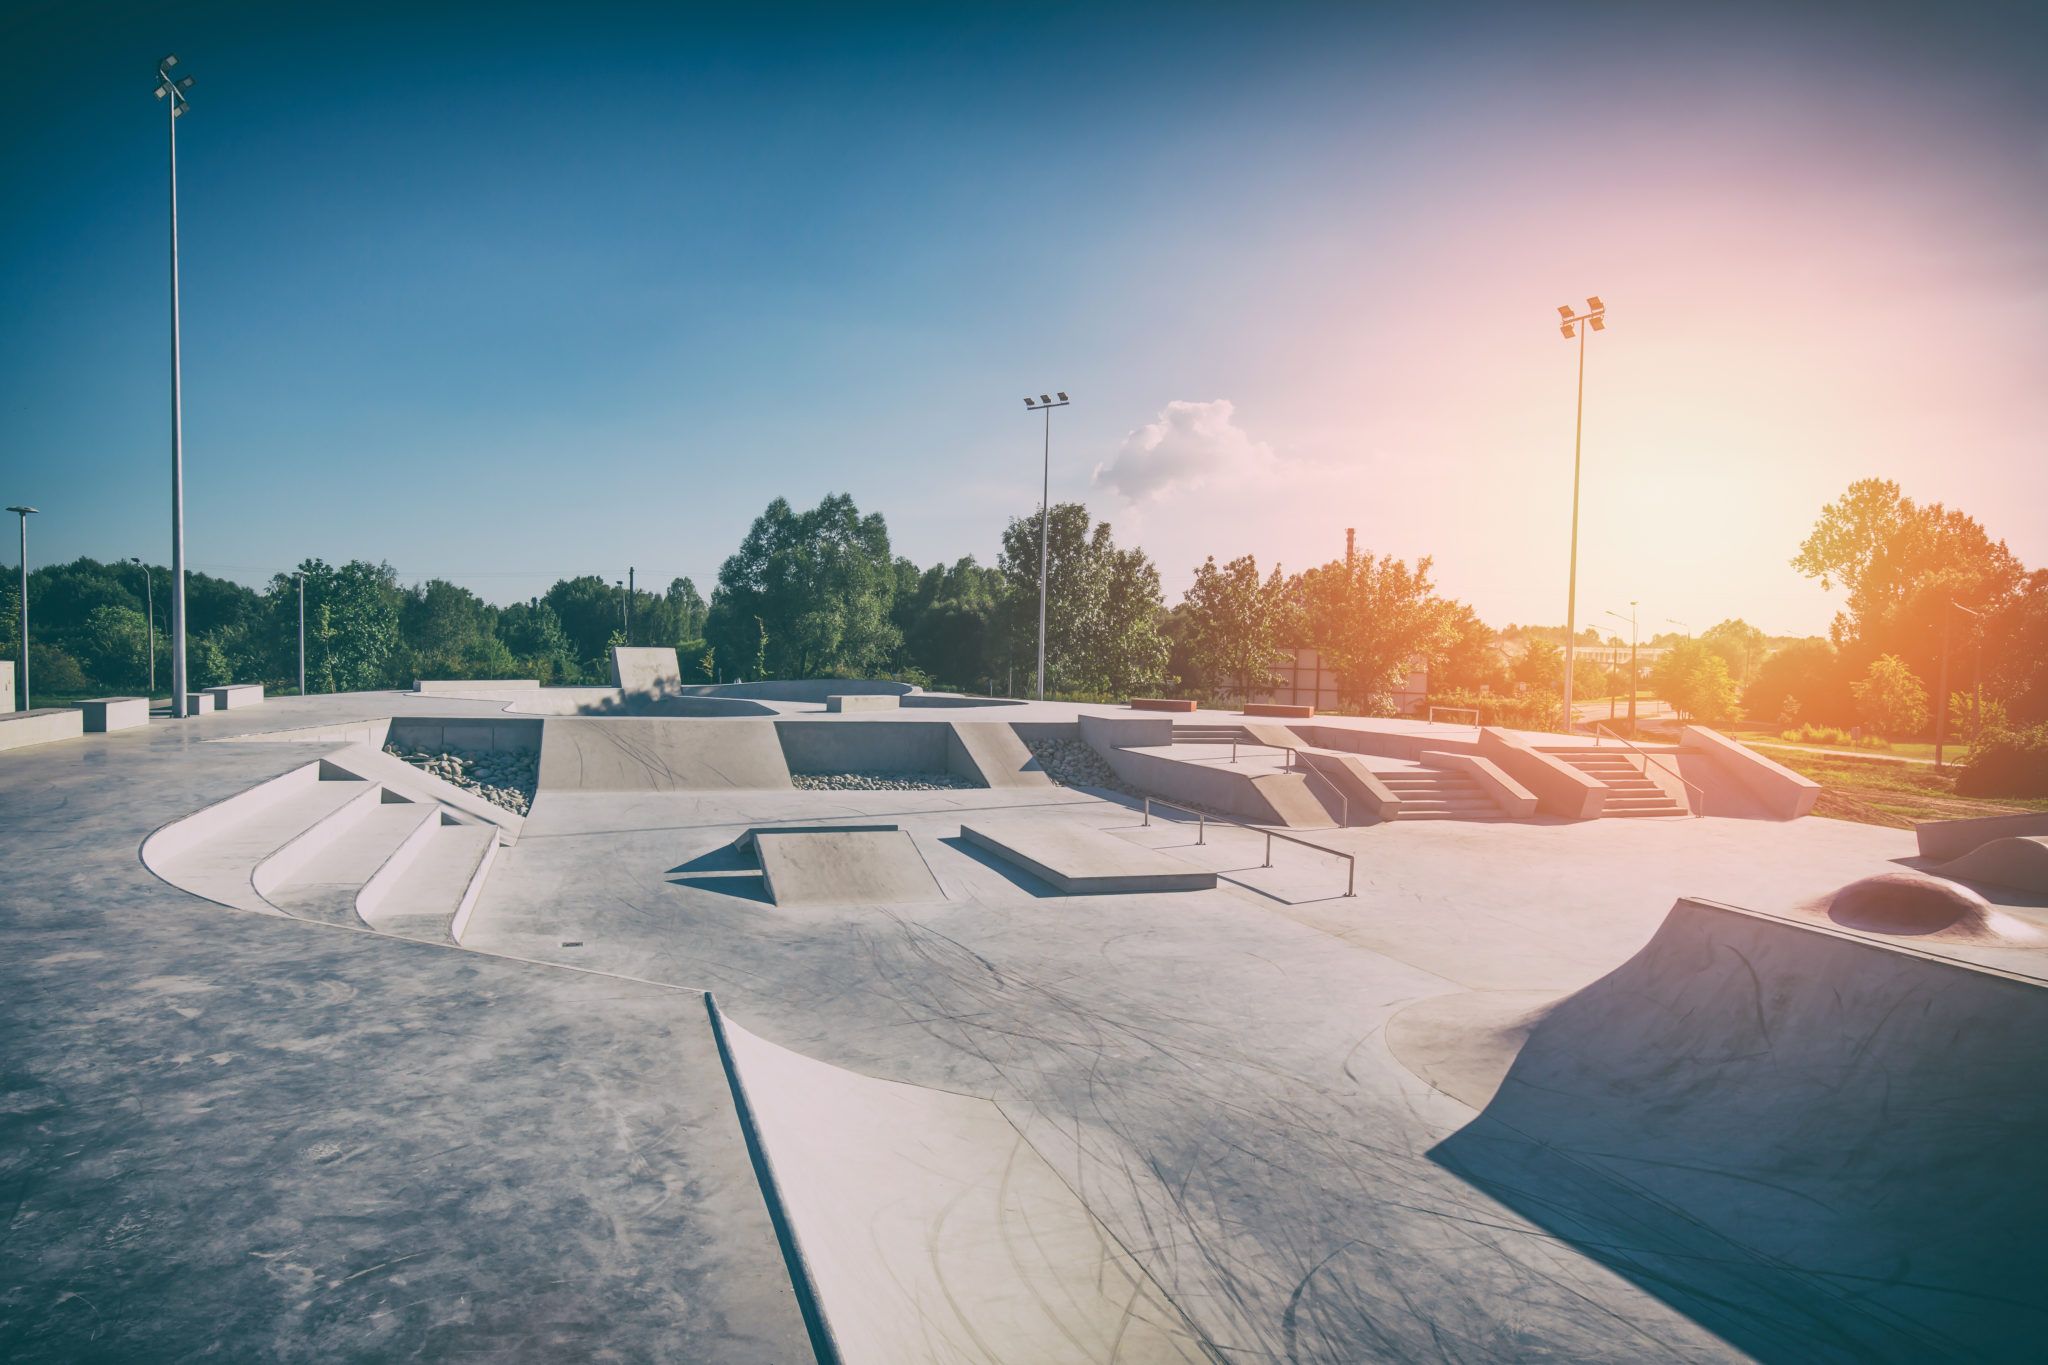 a skatepark surrounded by trees